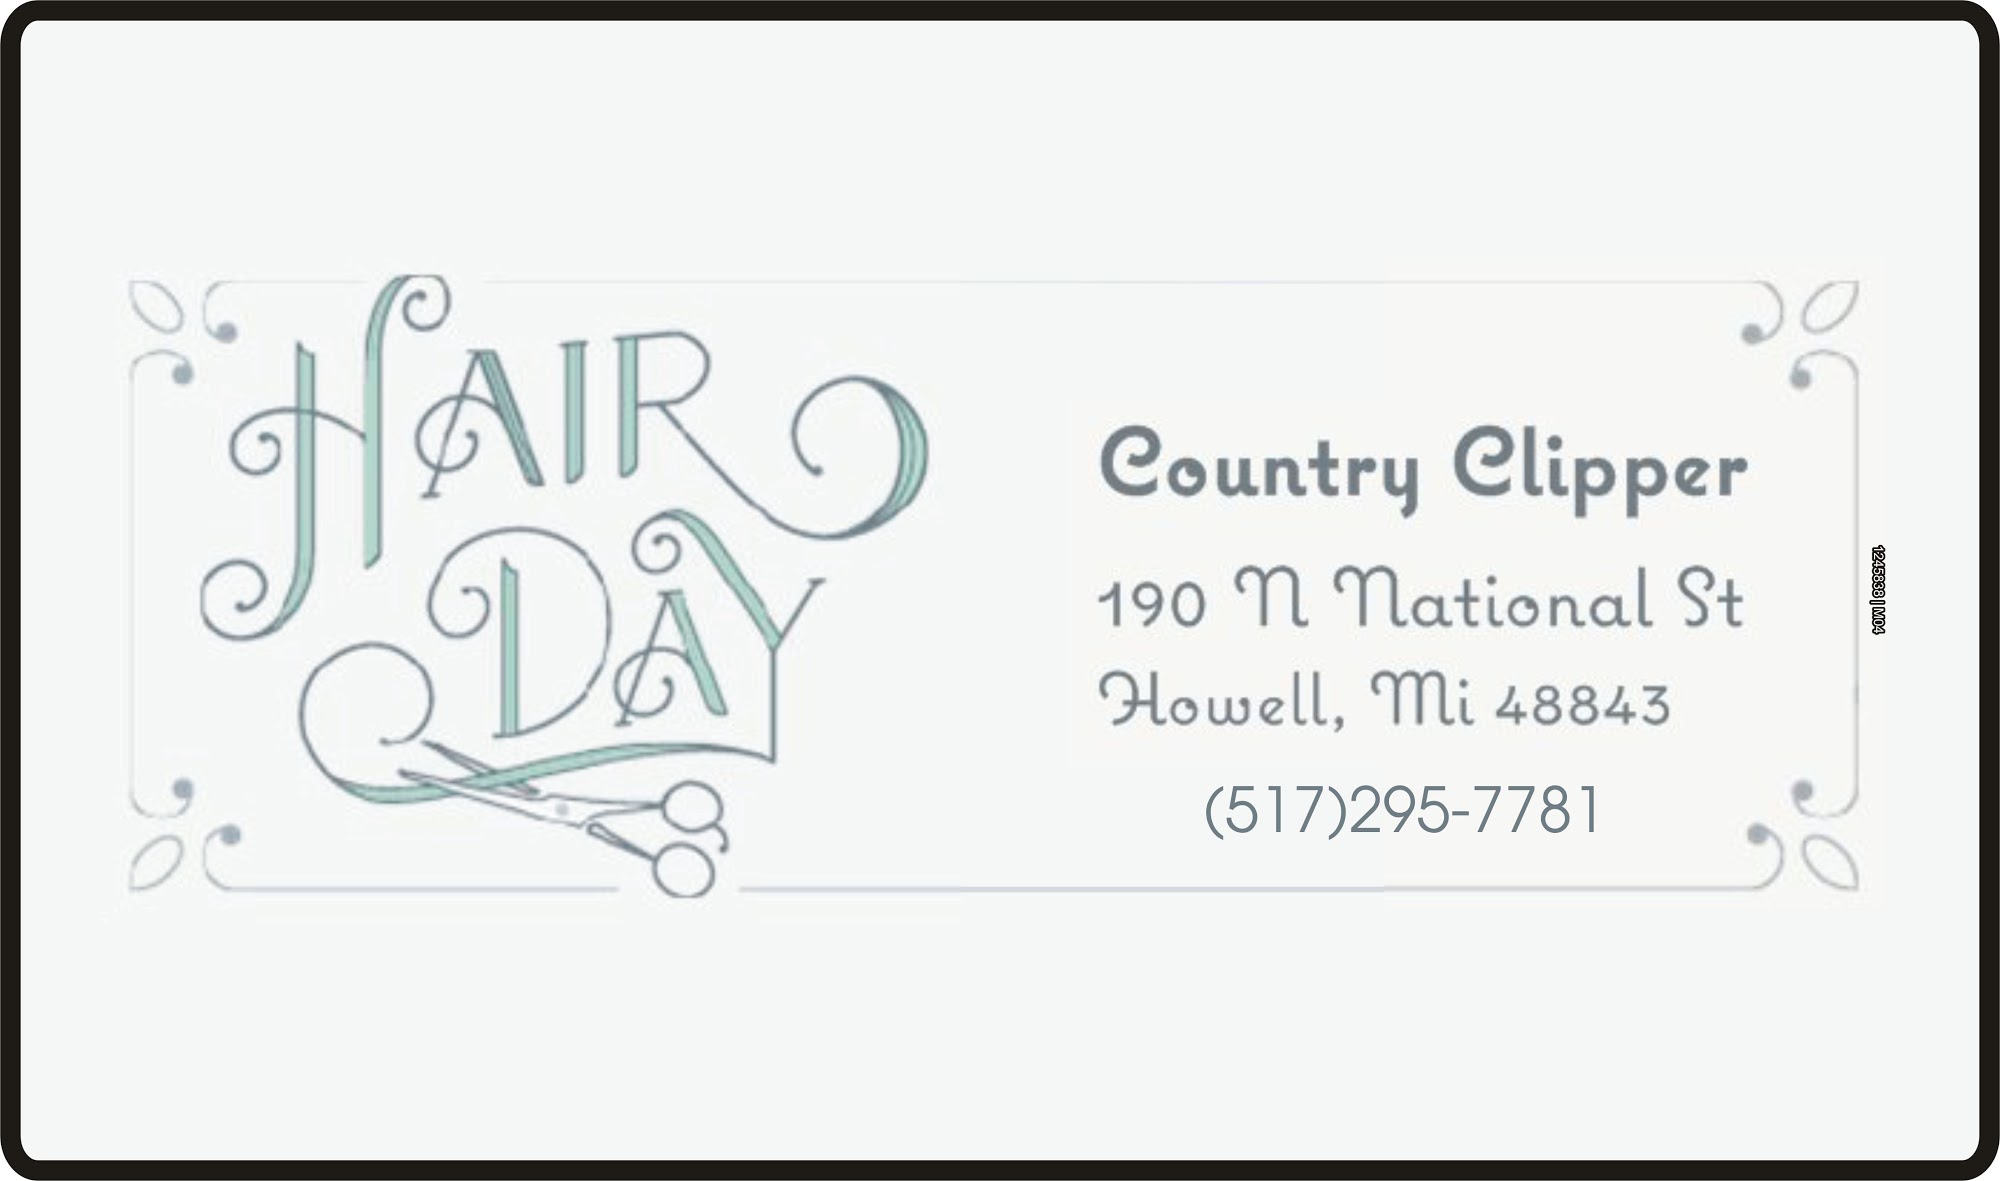 Infinity Family Hair Care @ Country Clipper